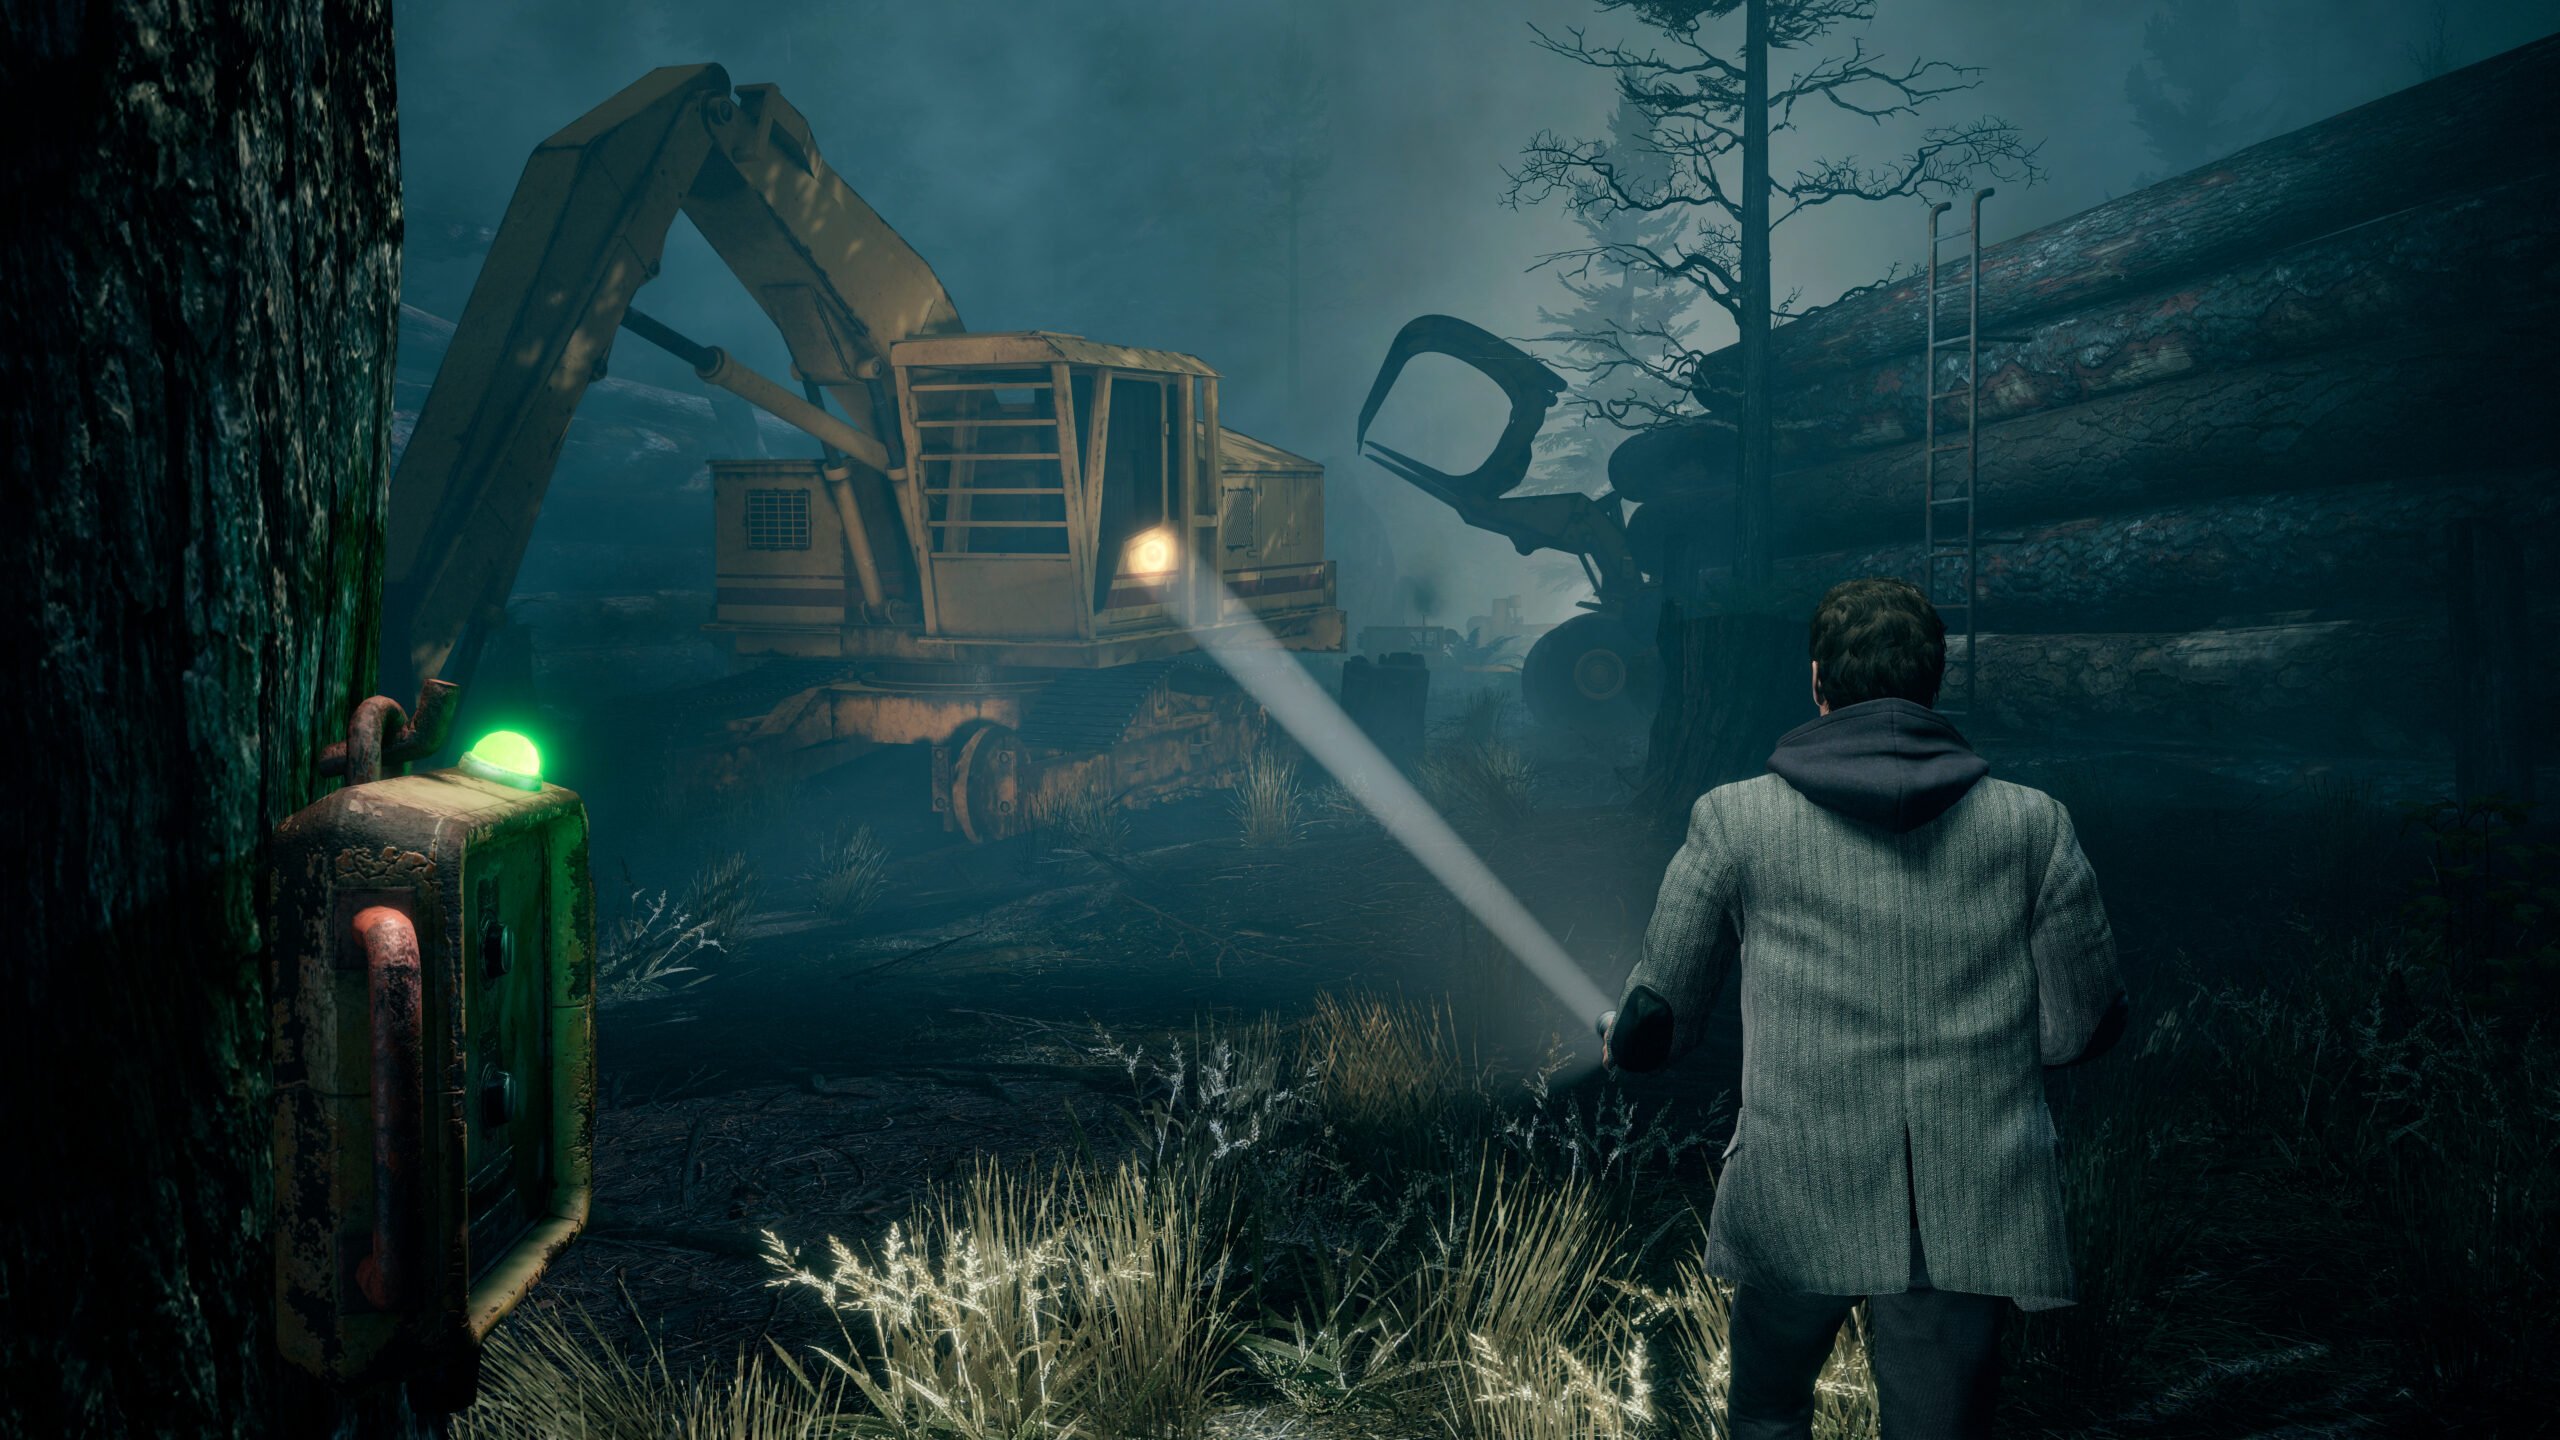 Alan Wake 2 Now Playable From Start To Finish - Rely on Horror